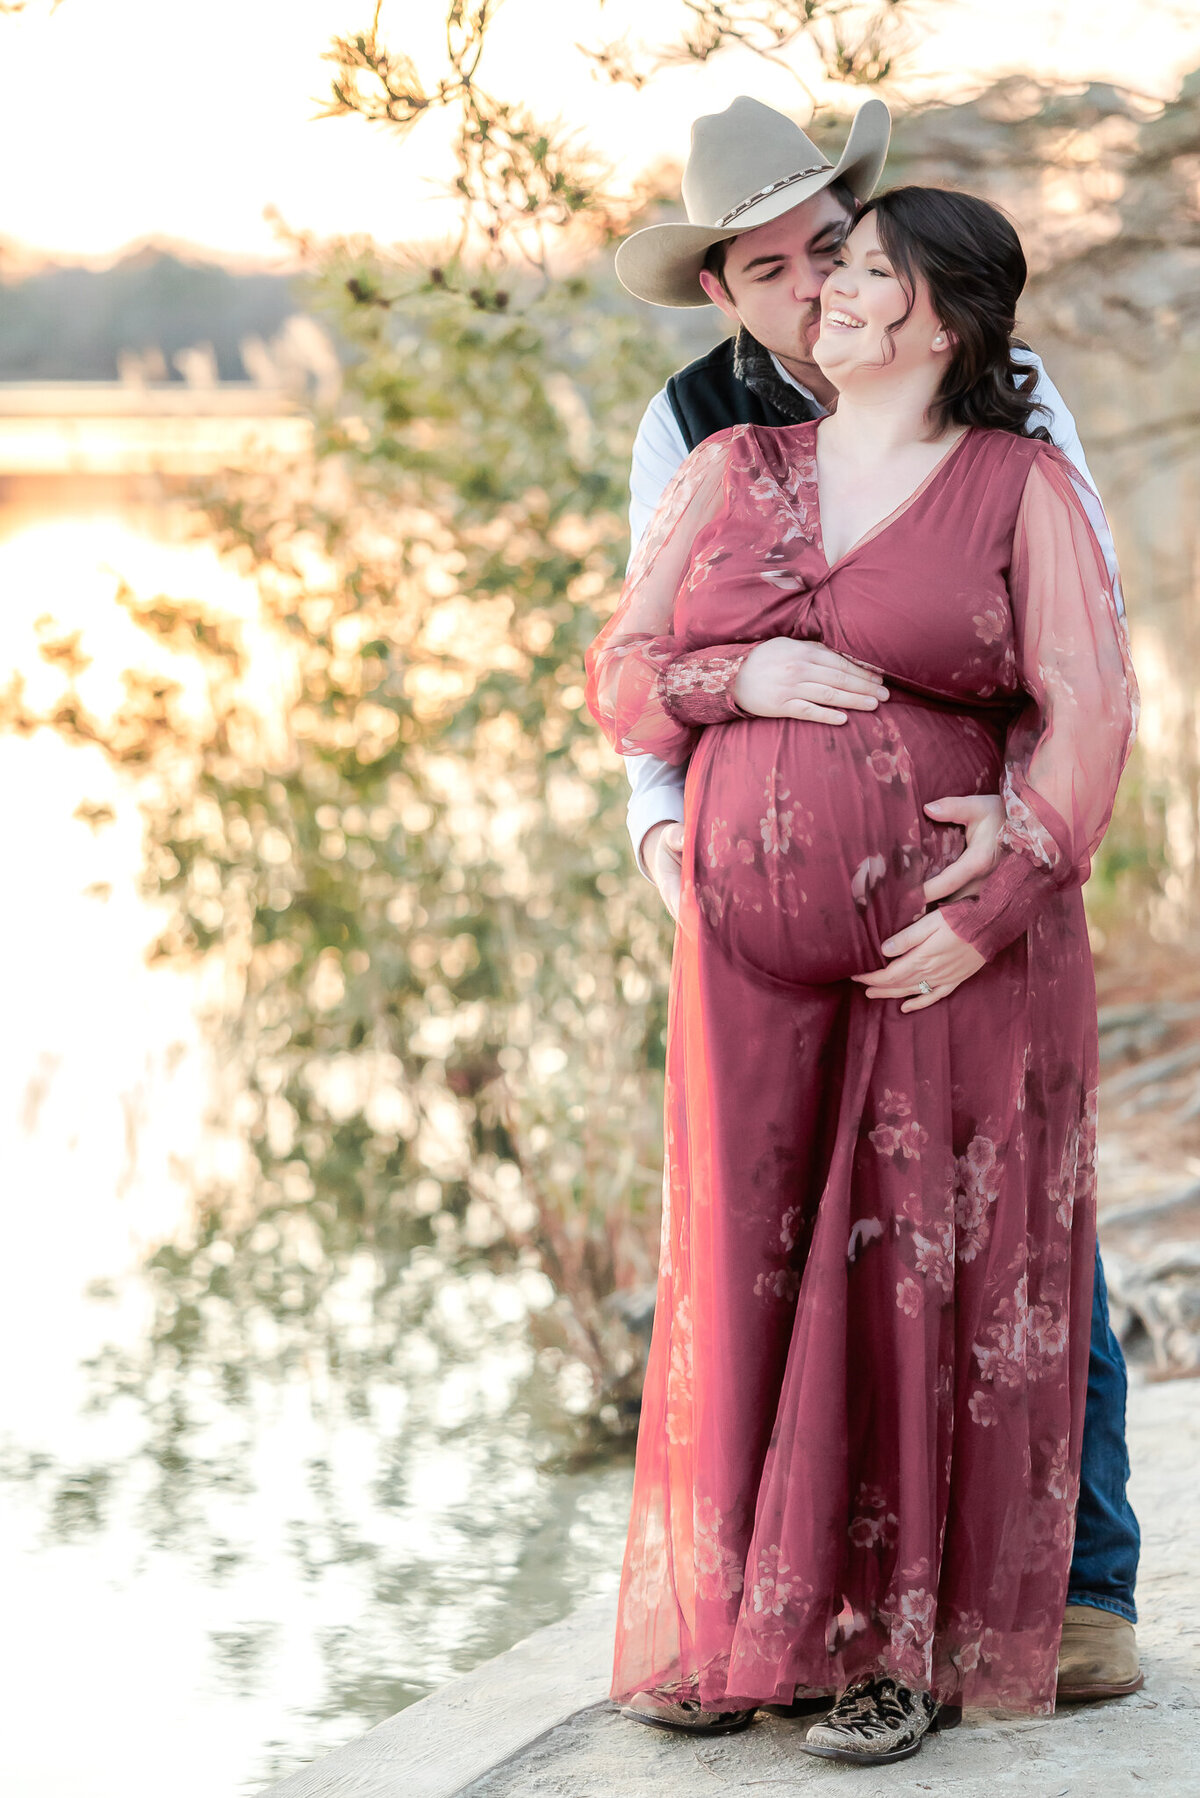 A man stands behind his pregnant wife and kisses her cheek during a maternity photography session in Chesapeake, VA. She wears a floor length, pink floral gown.